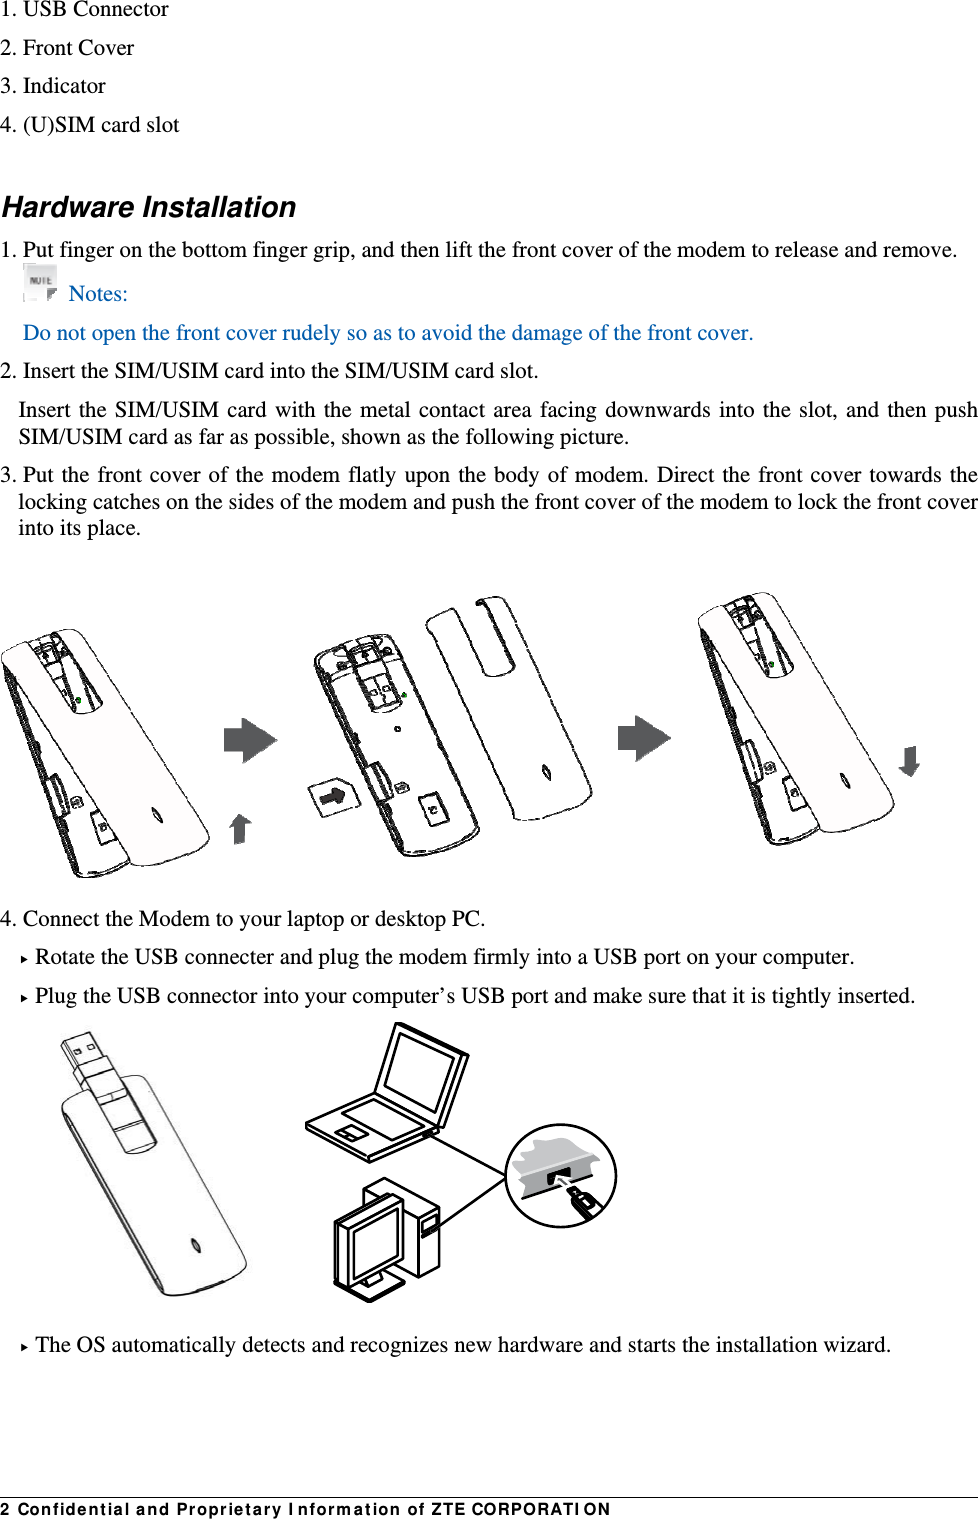 2  Con fid e nt ia l a nd Propr ie t a ry I nform at ion of ZTE CORPORATI ON1. USB Connector   2. Front Cover 3. Indicator   4. (U)SIM card slot  Hardware Installation 1. Put finger on the bottom finger grip, and then lift the front cover of the modem to release and remove.    Notes: Do not open the front cover rudely so as to avoid the damage of the front cover.   2. Insert the SIM/USIM card into the SIM/USIM card slot. Insert the SIM/USIM card with the metal contact area facing downwards into the slot, and then push SIM/USIM card as far as possible, shown as the following picture. 3. Put the front cover of the modem flatly upon the body of modem. Direct the front cover towards the locking catches on the sides of the modem and push the front cover of the modem to lock the front cover into its place.    4. Connect the Modem to your laptop or desktop PC.  Rotate the USB connecter and plug the modem firmly into a USB port on your computer.  Plug the USB connector into your computer’s USB port and make sure that it is tightly inserted.          The OS automatically detects and recognizes new hardware and starts the installation wizard.   